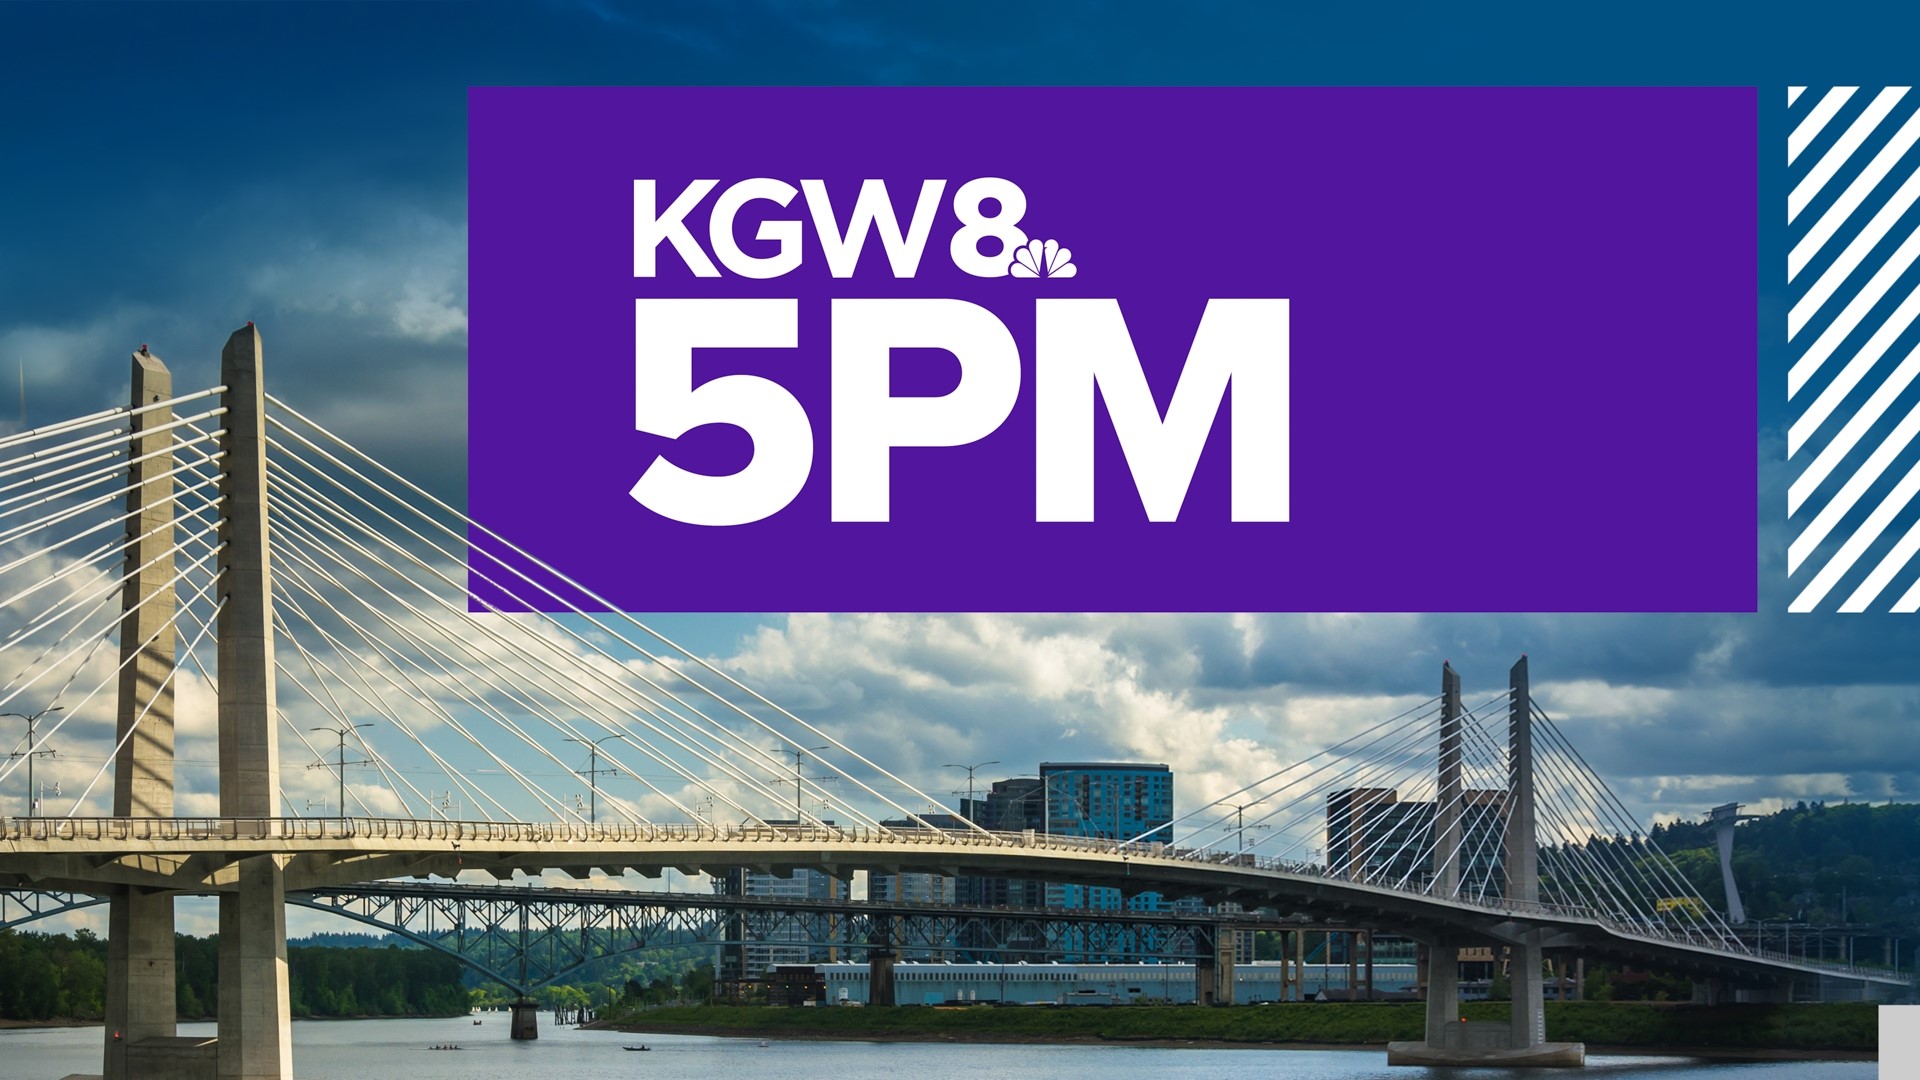 Local news, community features and weather from KGW